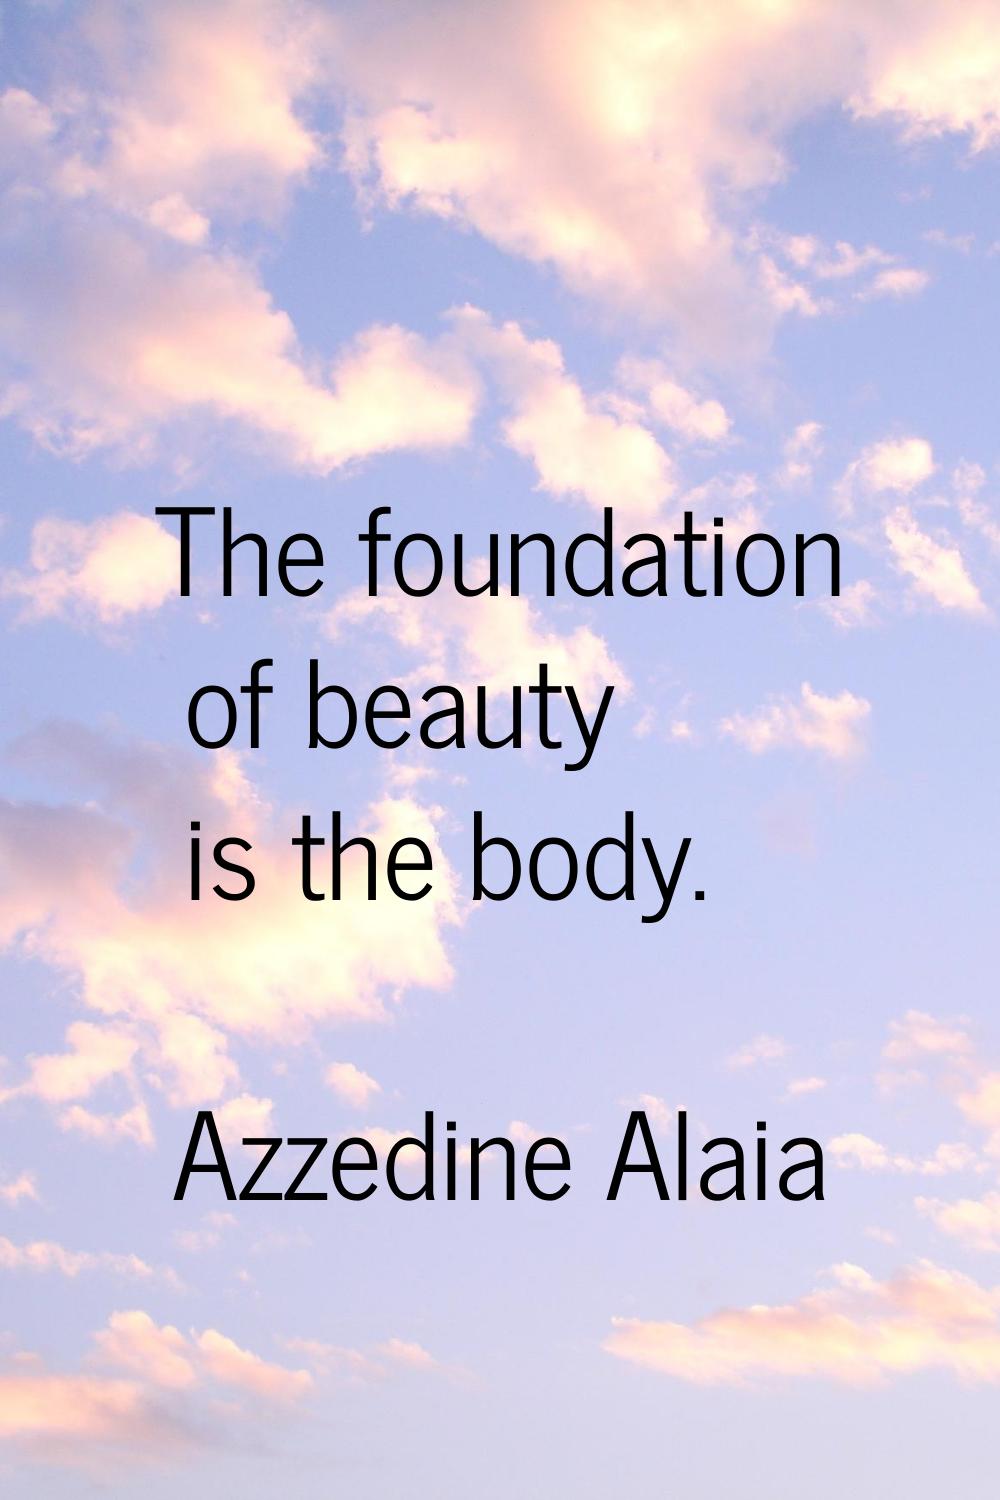 The foundation of beauty is the body.